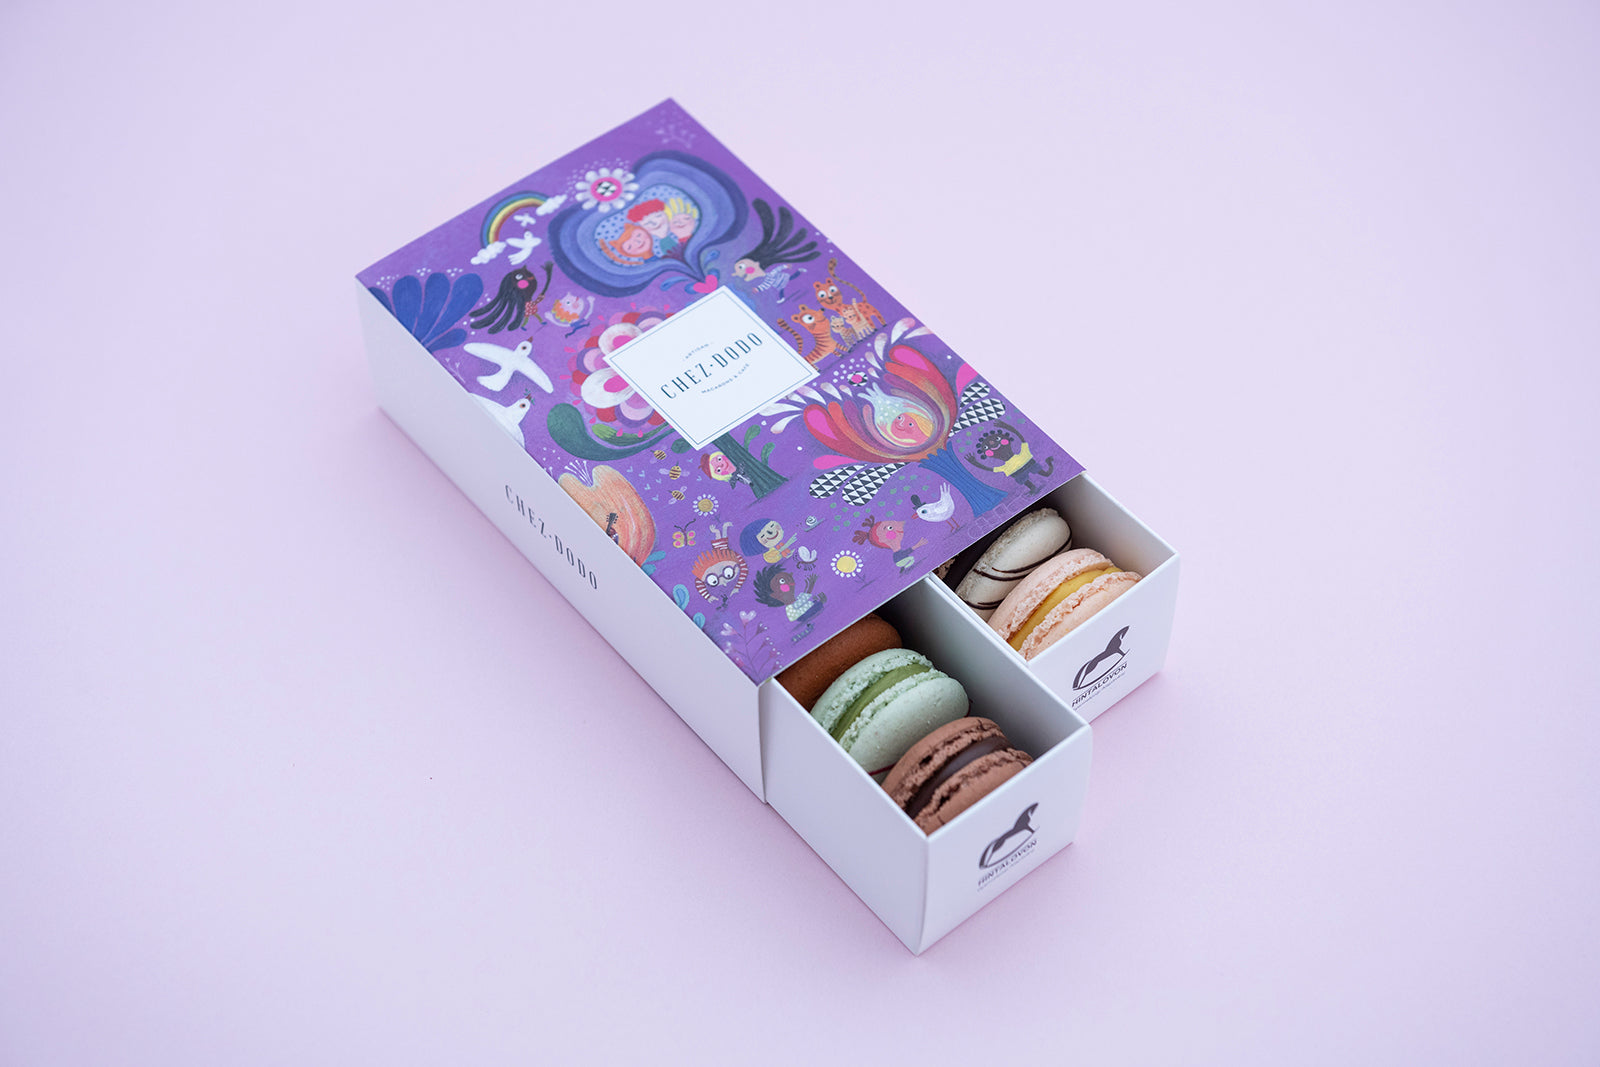 12-piece macaron selection in charity box